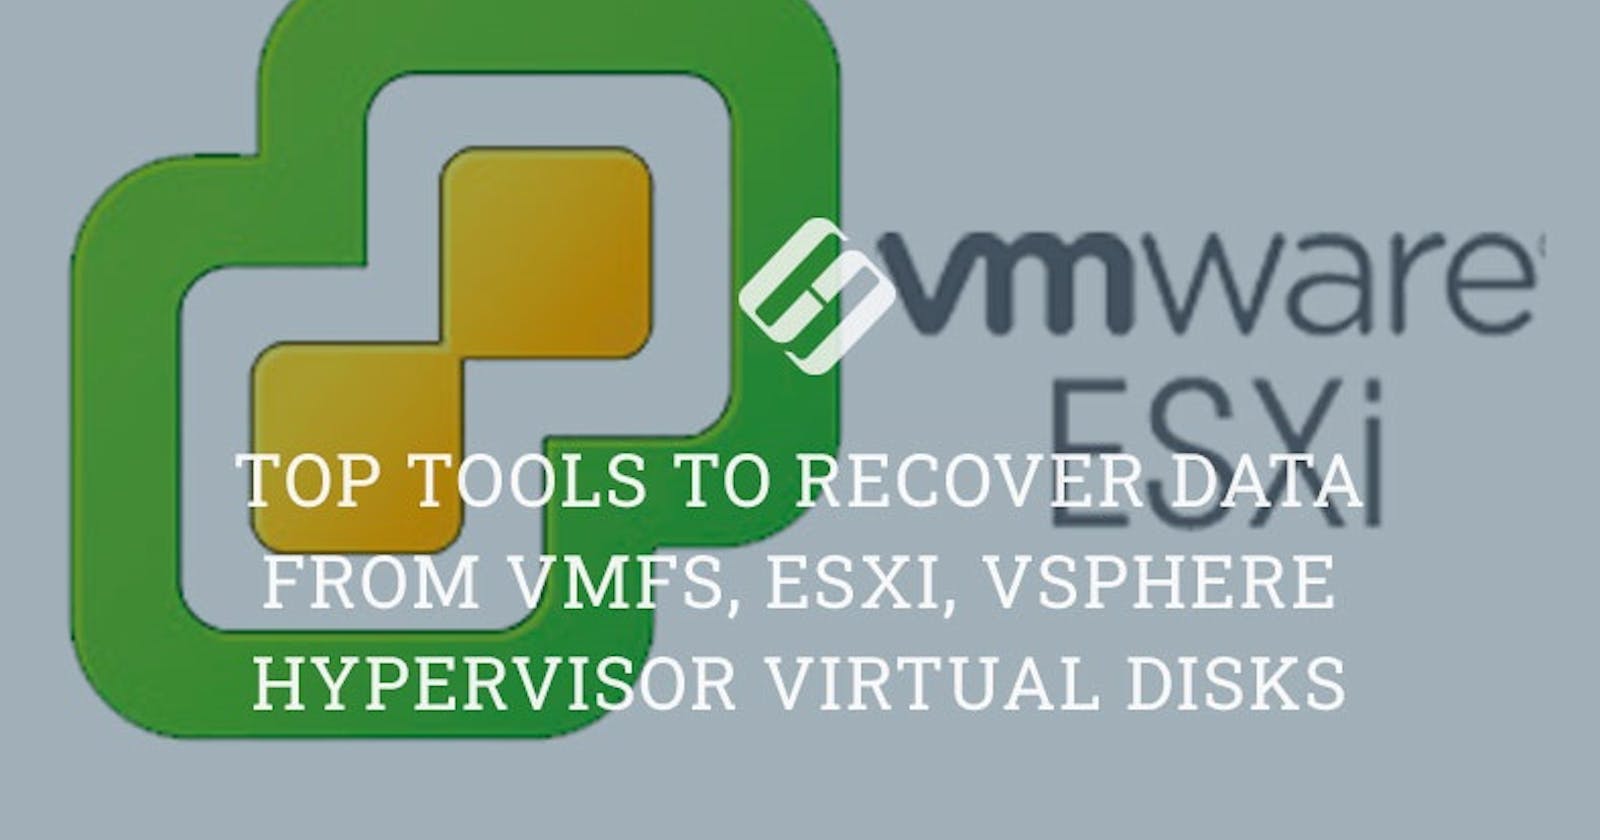 Top Tools to Recover Data from VMFS, ESXi, Vsphere Hypervisor Virtual Disks